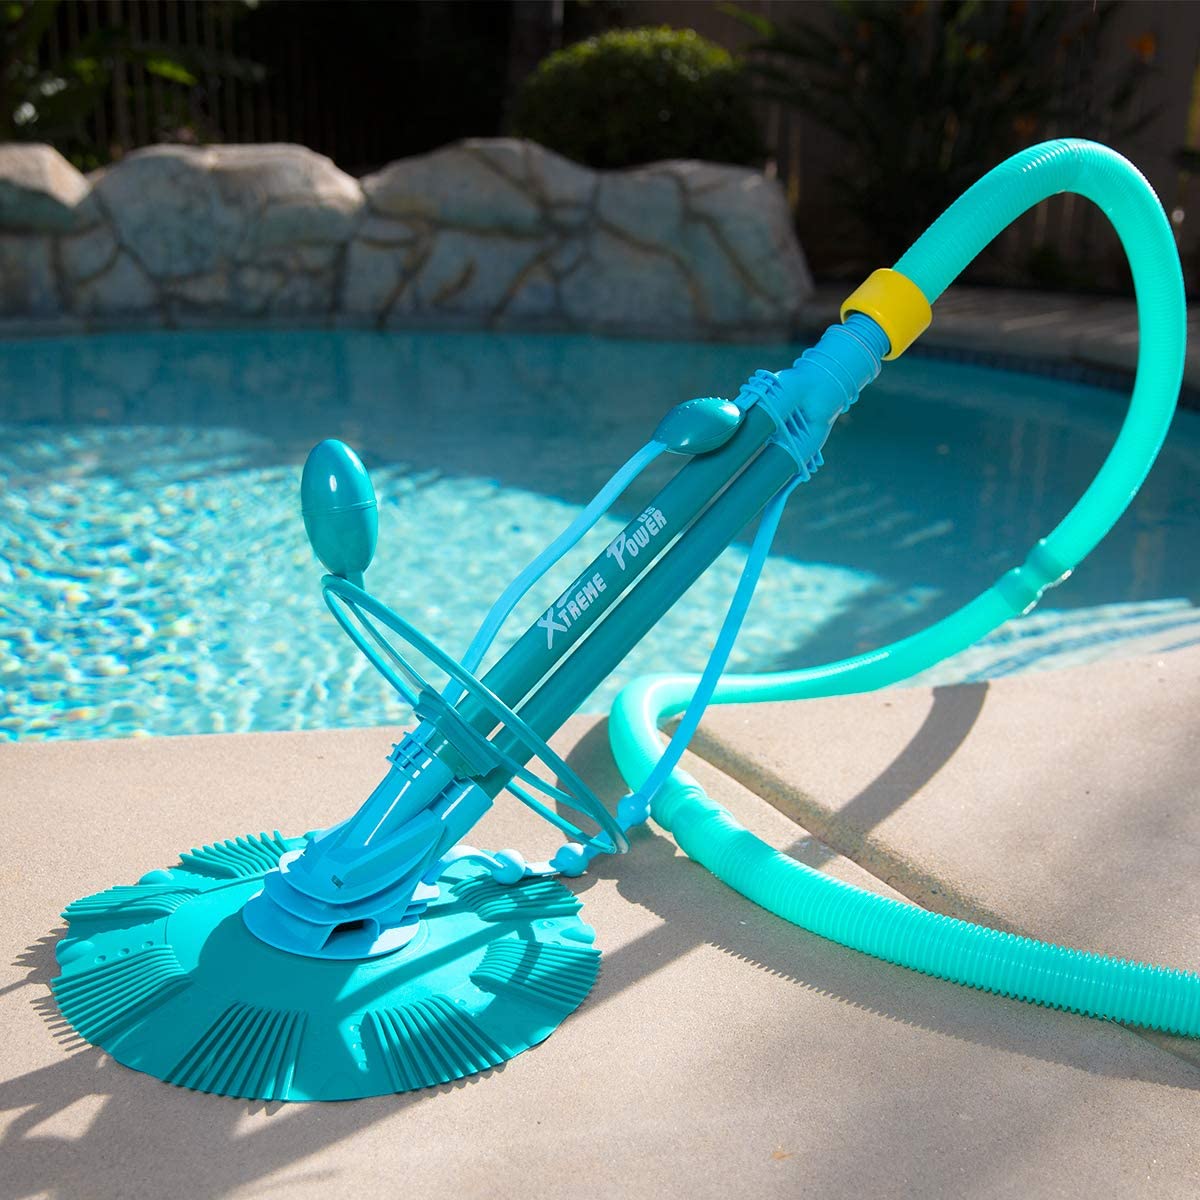 Review of XtremepowerUS 75037 Climb Wall Pool Cleaner Automatic Suction Vacuum-Generic, Blue